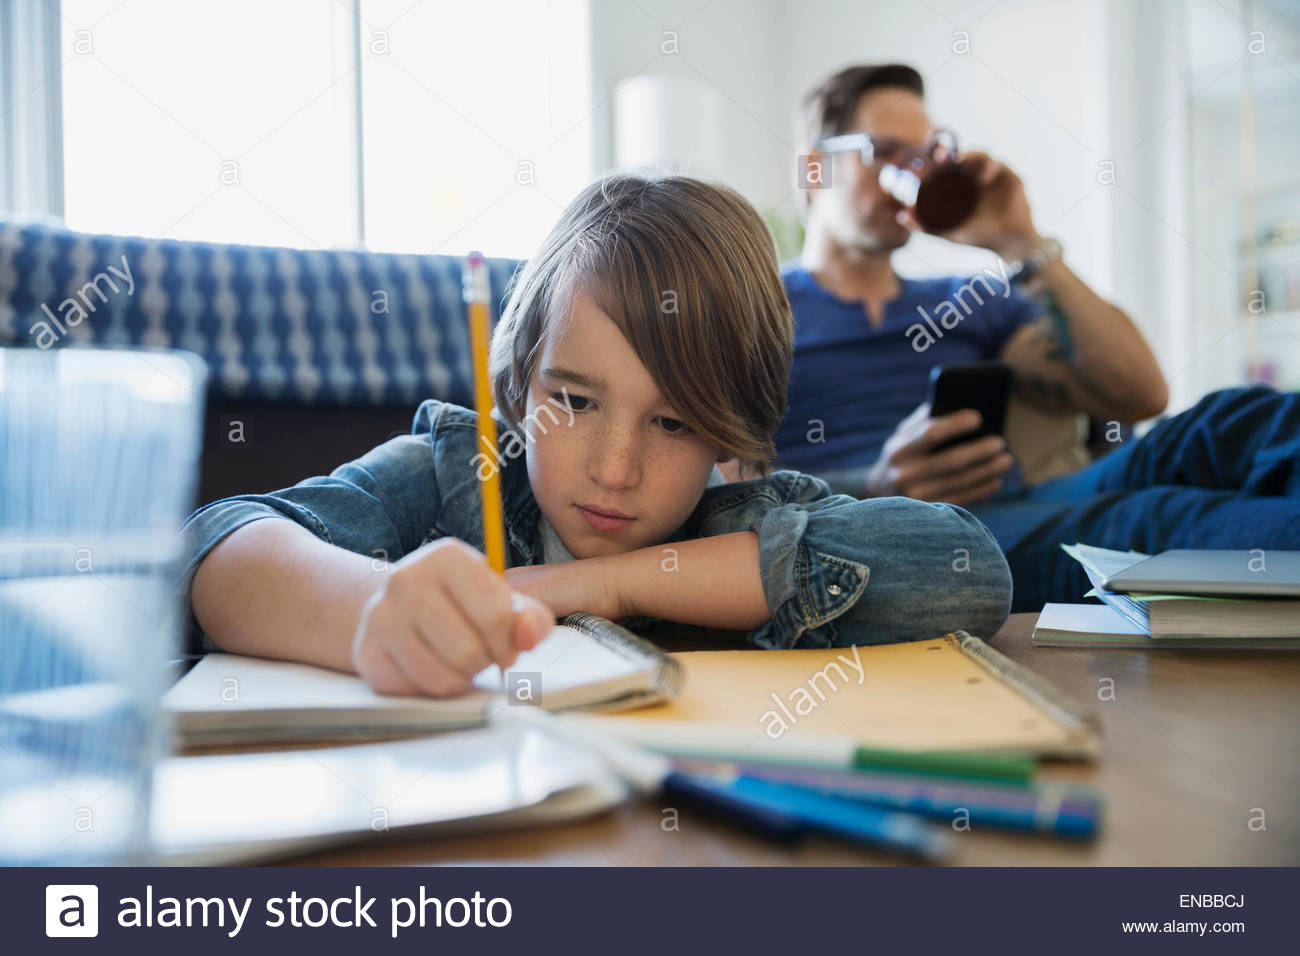 Son doing homework with father in background Stock Photo